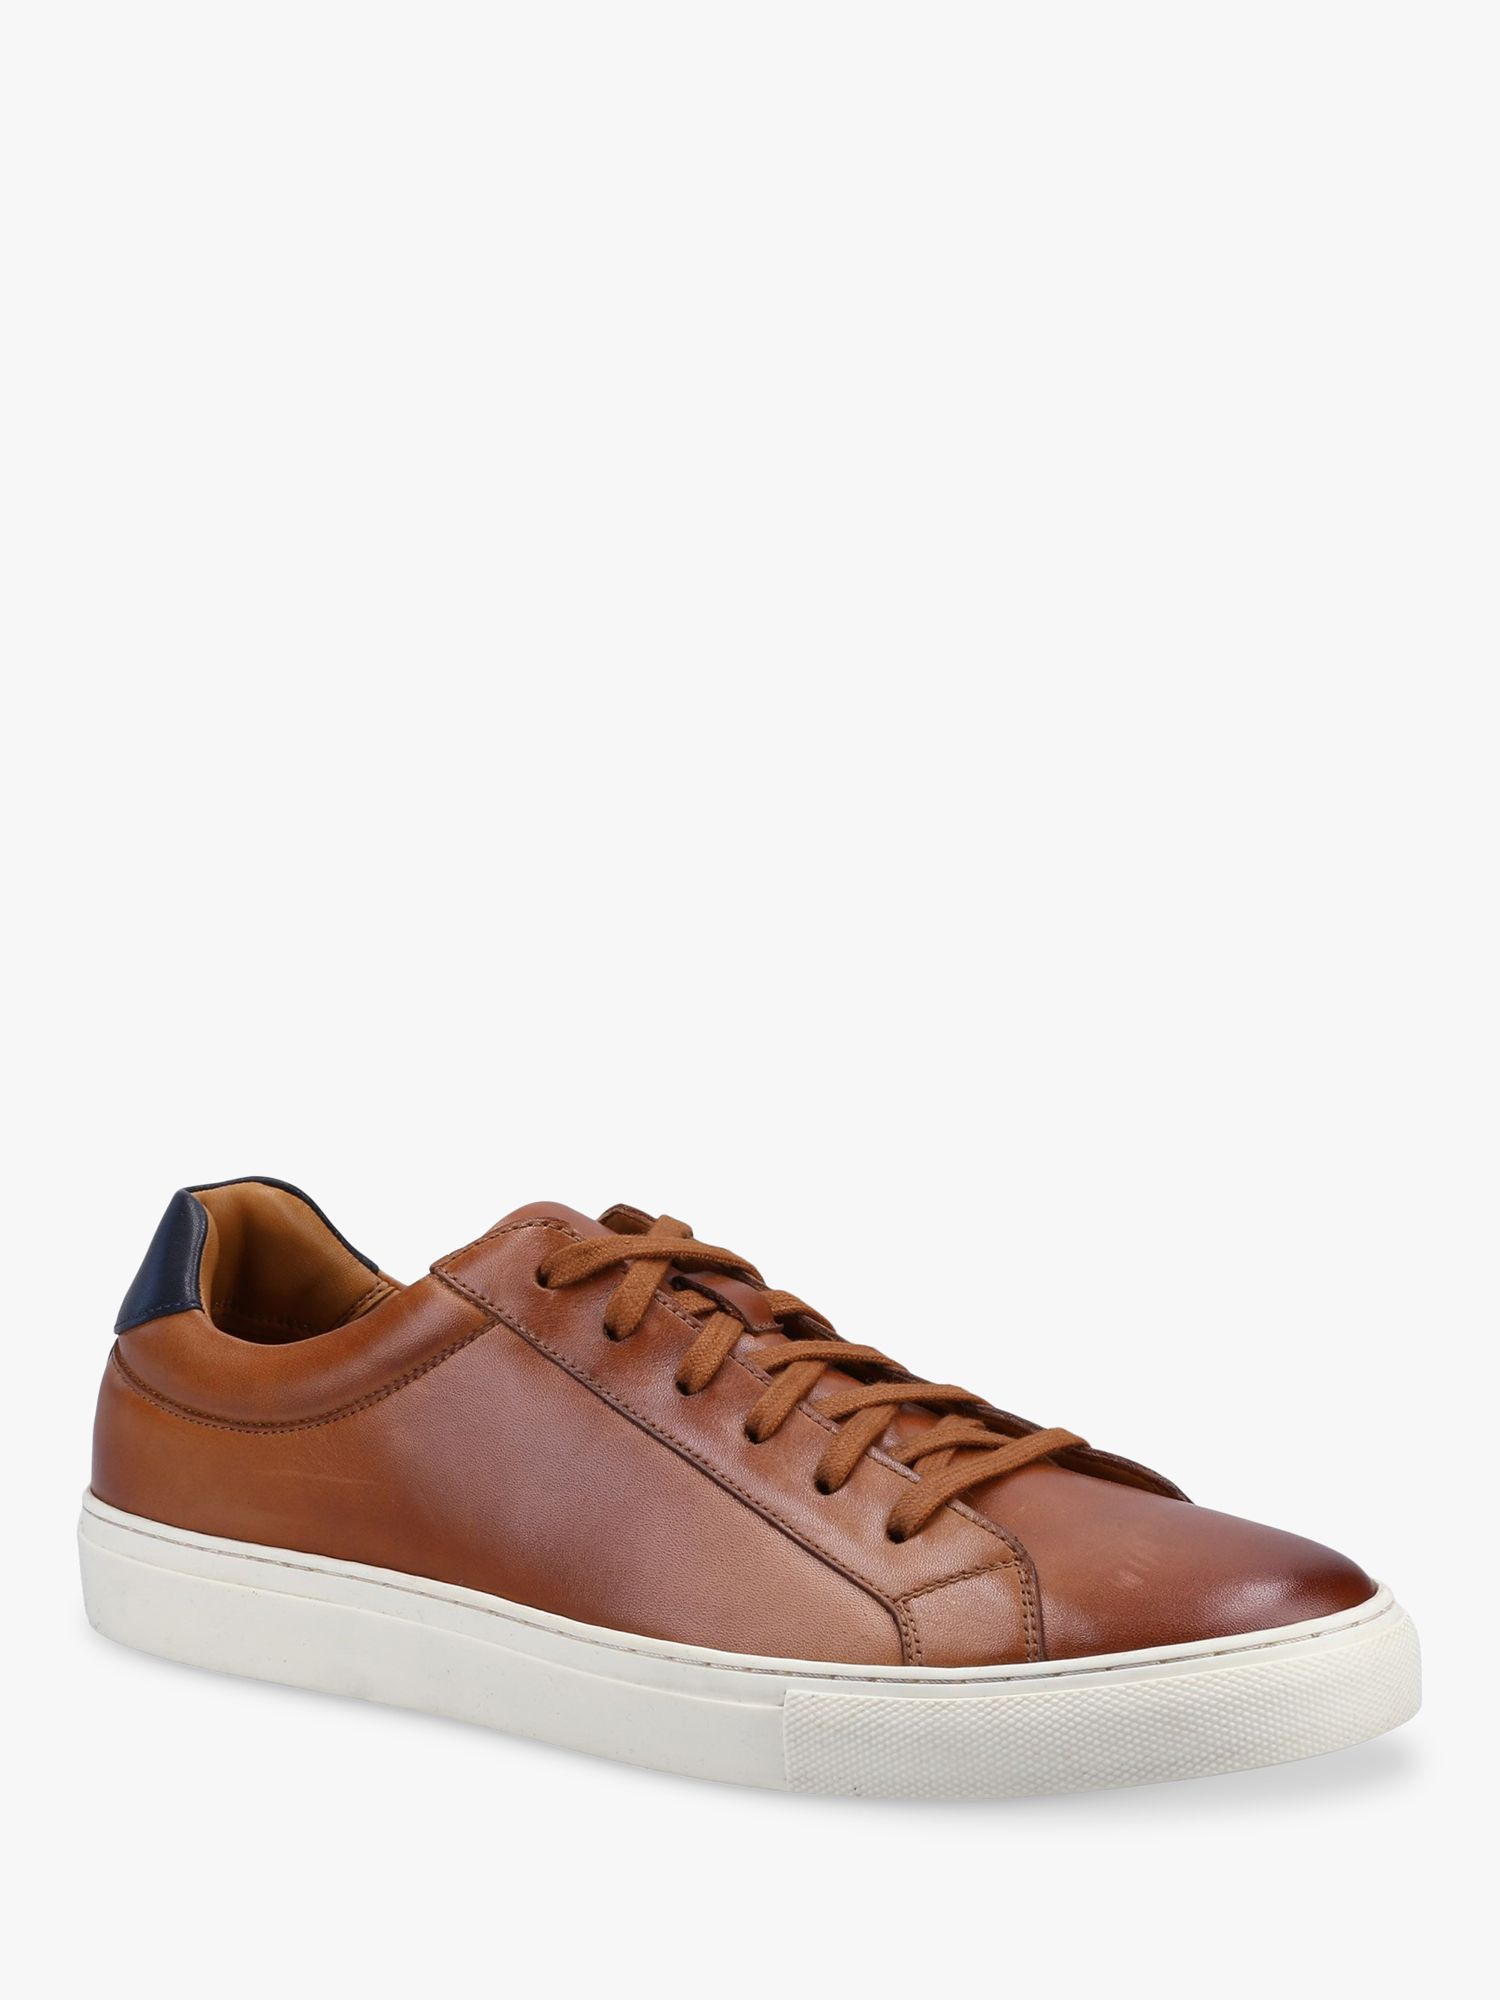 Hush Puppies Colton Cupsole Trainers, Tan, 6